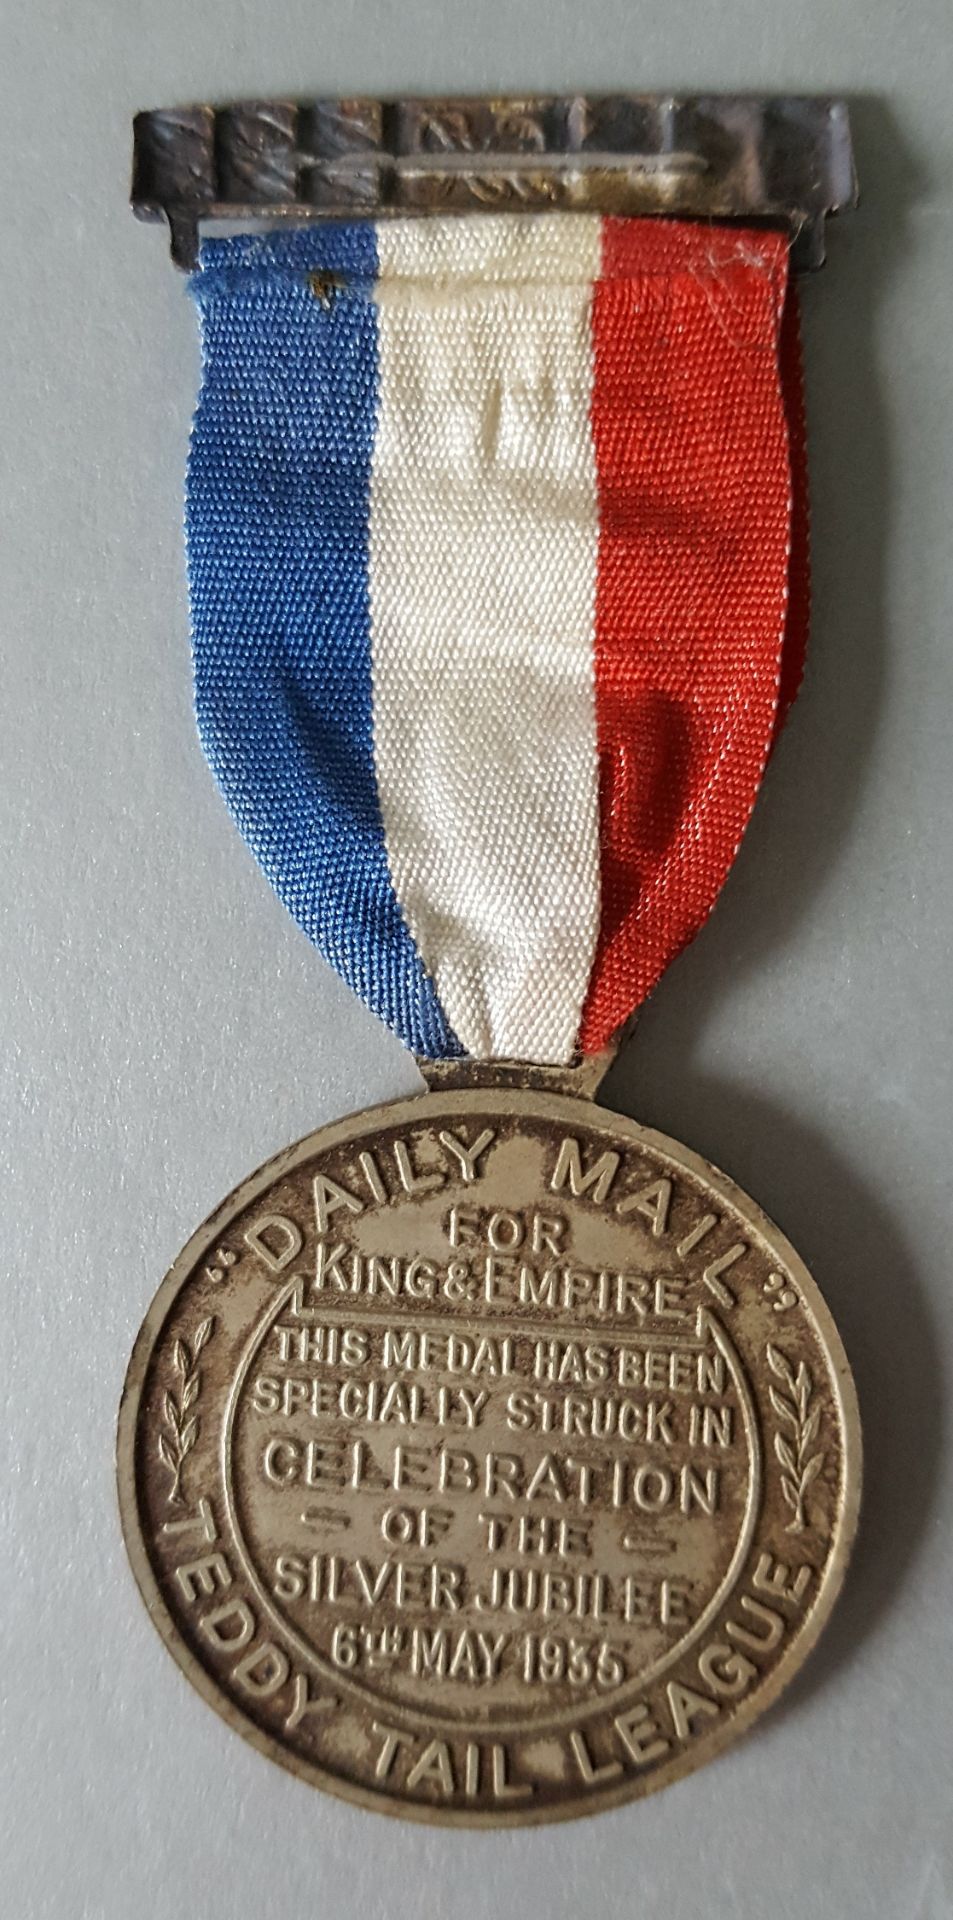 Vintage Royal Mail Teddy Tail League George V Silver Jubilee Medal & Paperwork 1935 - Image 3 of 4